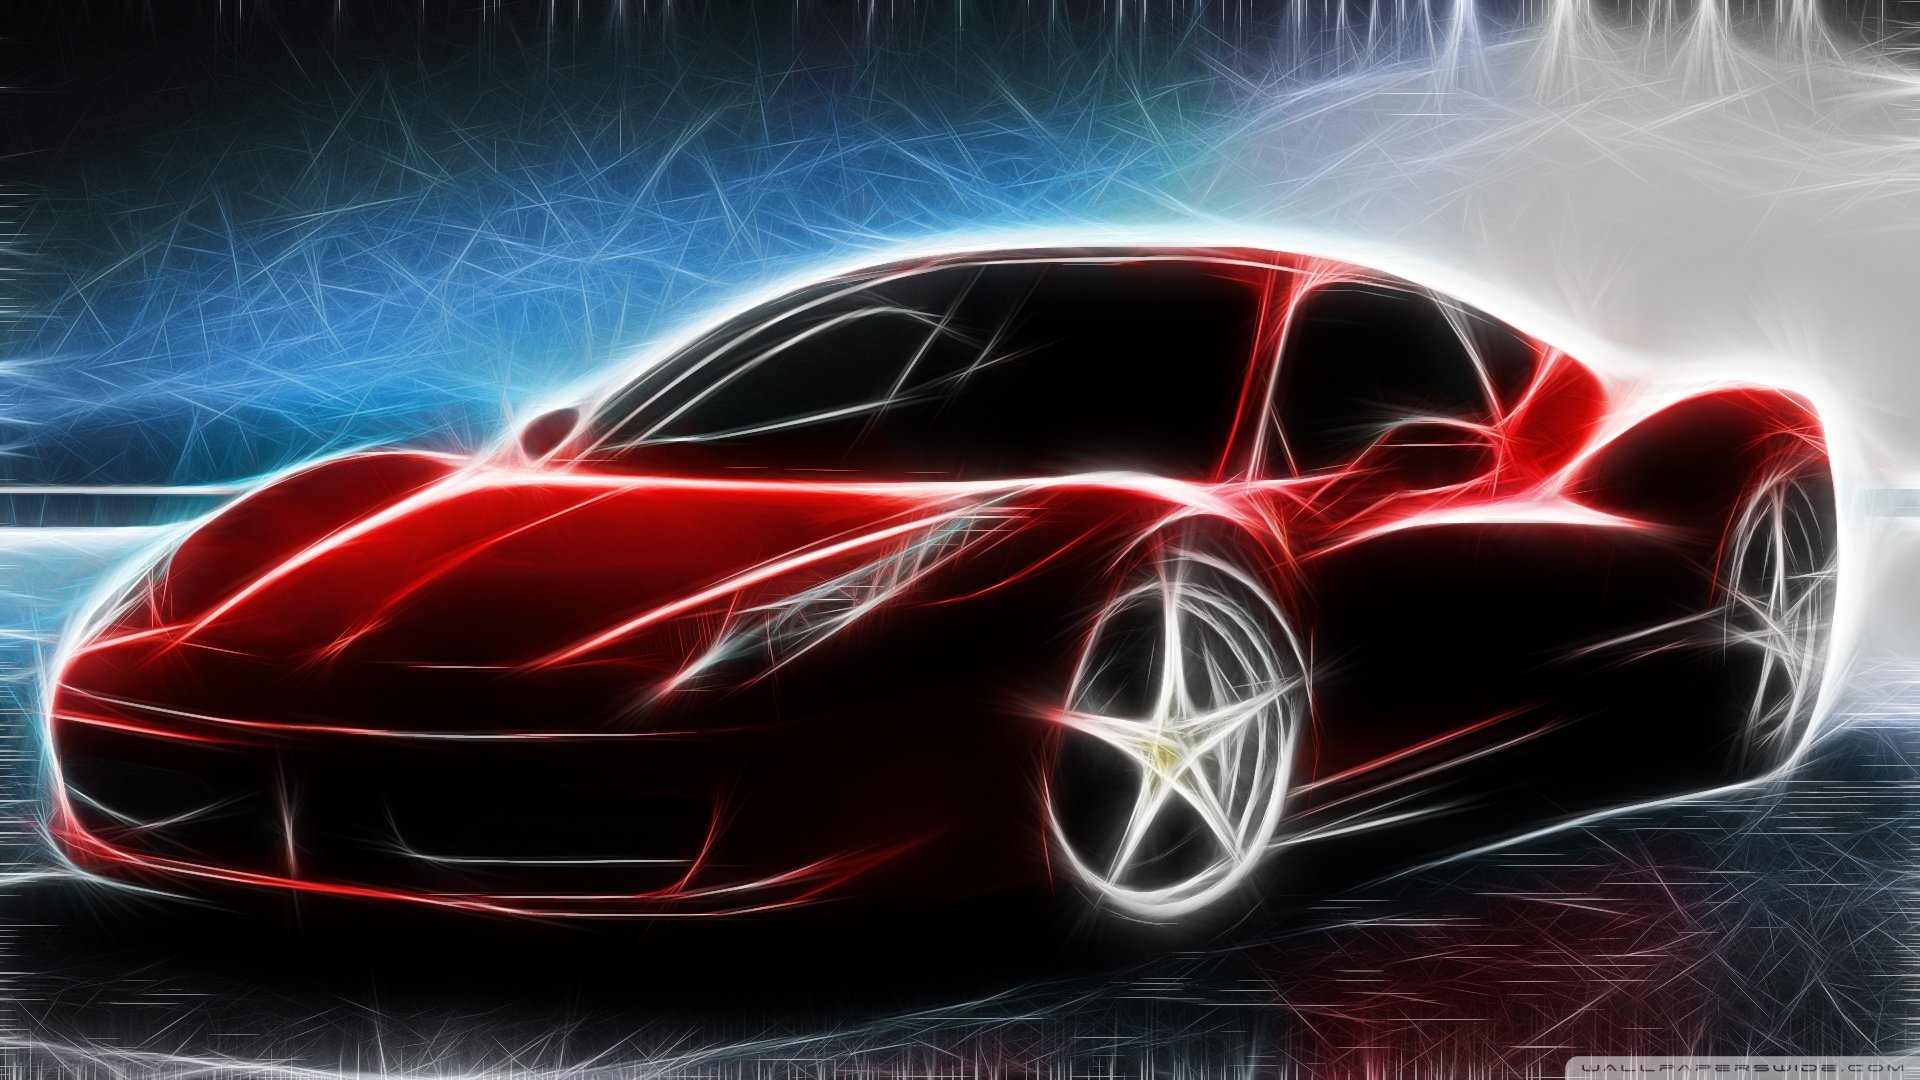 Coolest Collection of Ferrari Wallpaper amp Backgrounds In HD